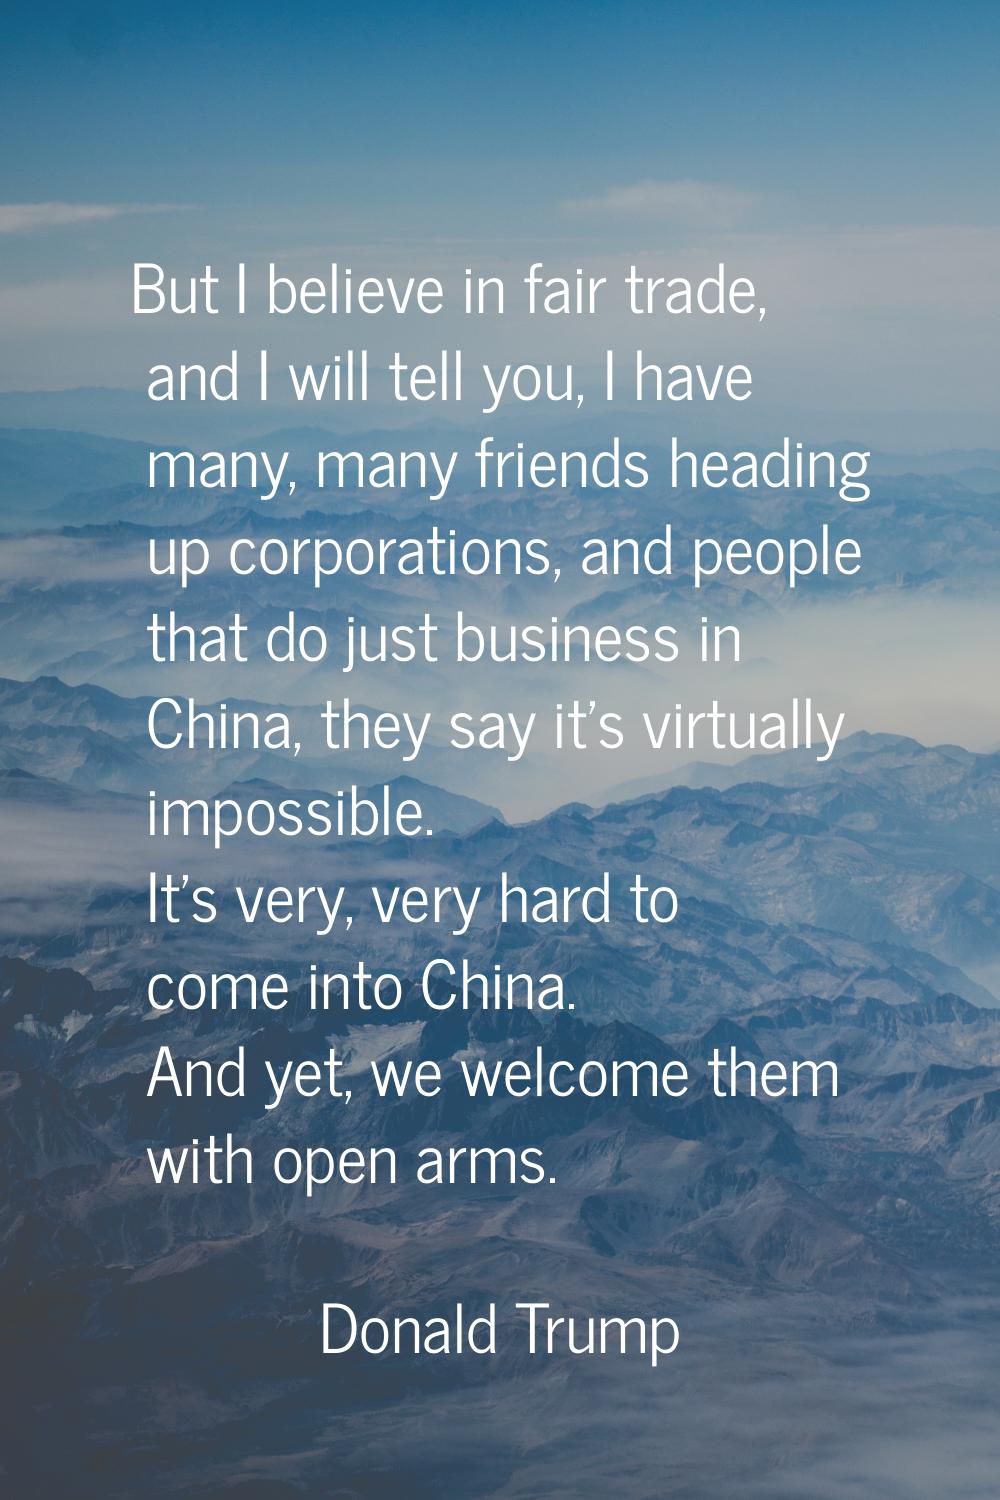 But I believe in fair trade, and I will tell you, I have many, many friends heading up corporations